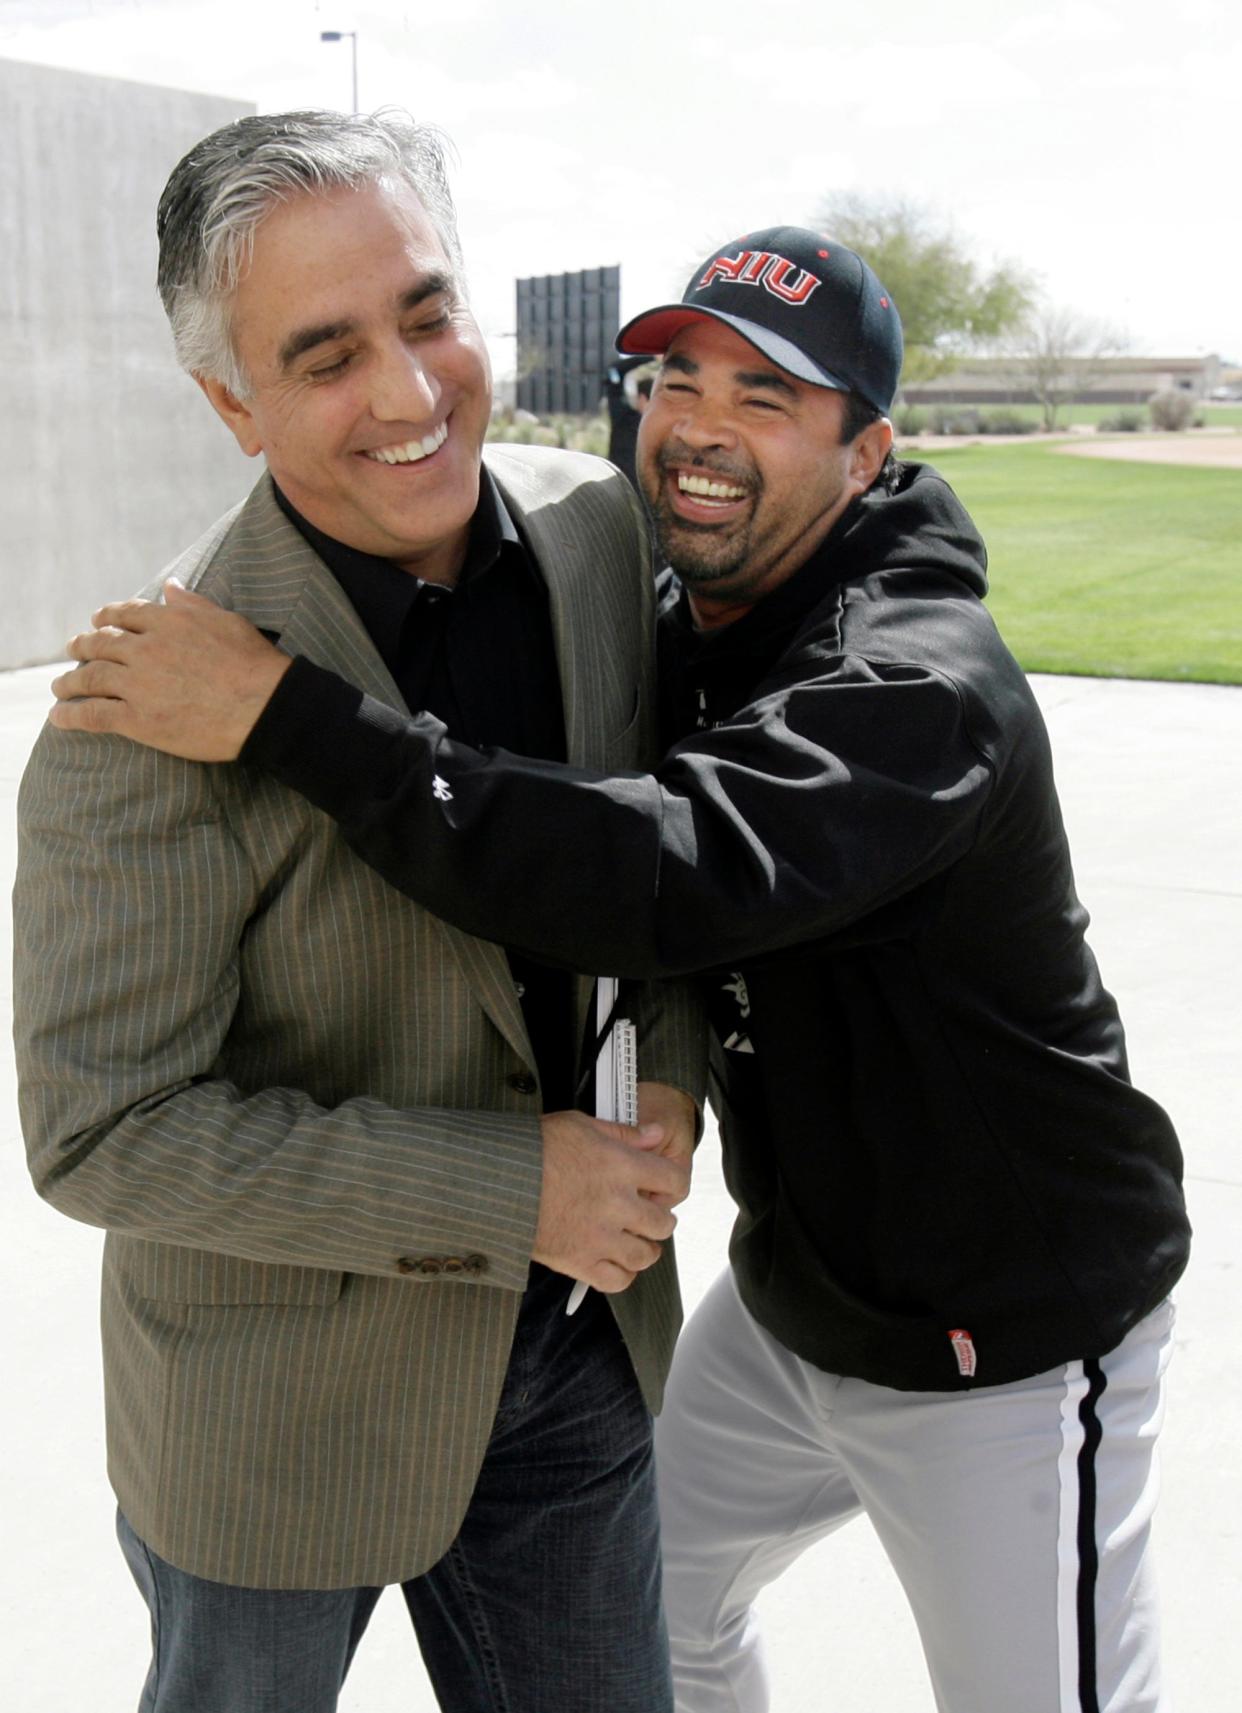 In this Feb. 16, 2008, file photo, Chicago White Sox manager Ozzie Guillen (right) jokes with ESPN's Pedro Gomez after a news conference during the first day of baseball spring training for pitchers and catchers in Tucson. Gomez, a longtime baseball correspondent for ESPN and The Arizona Republic, who covered more than 25 World Series, died Feb. 7, 2021. He was 58.